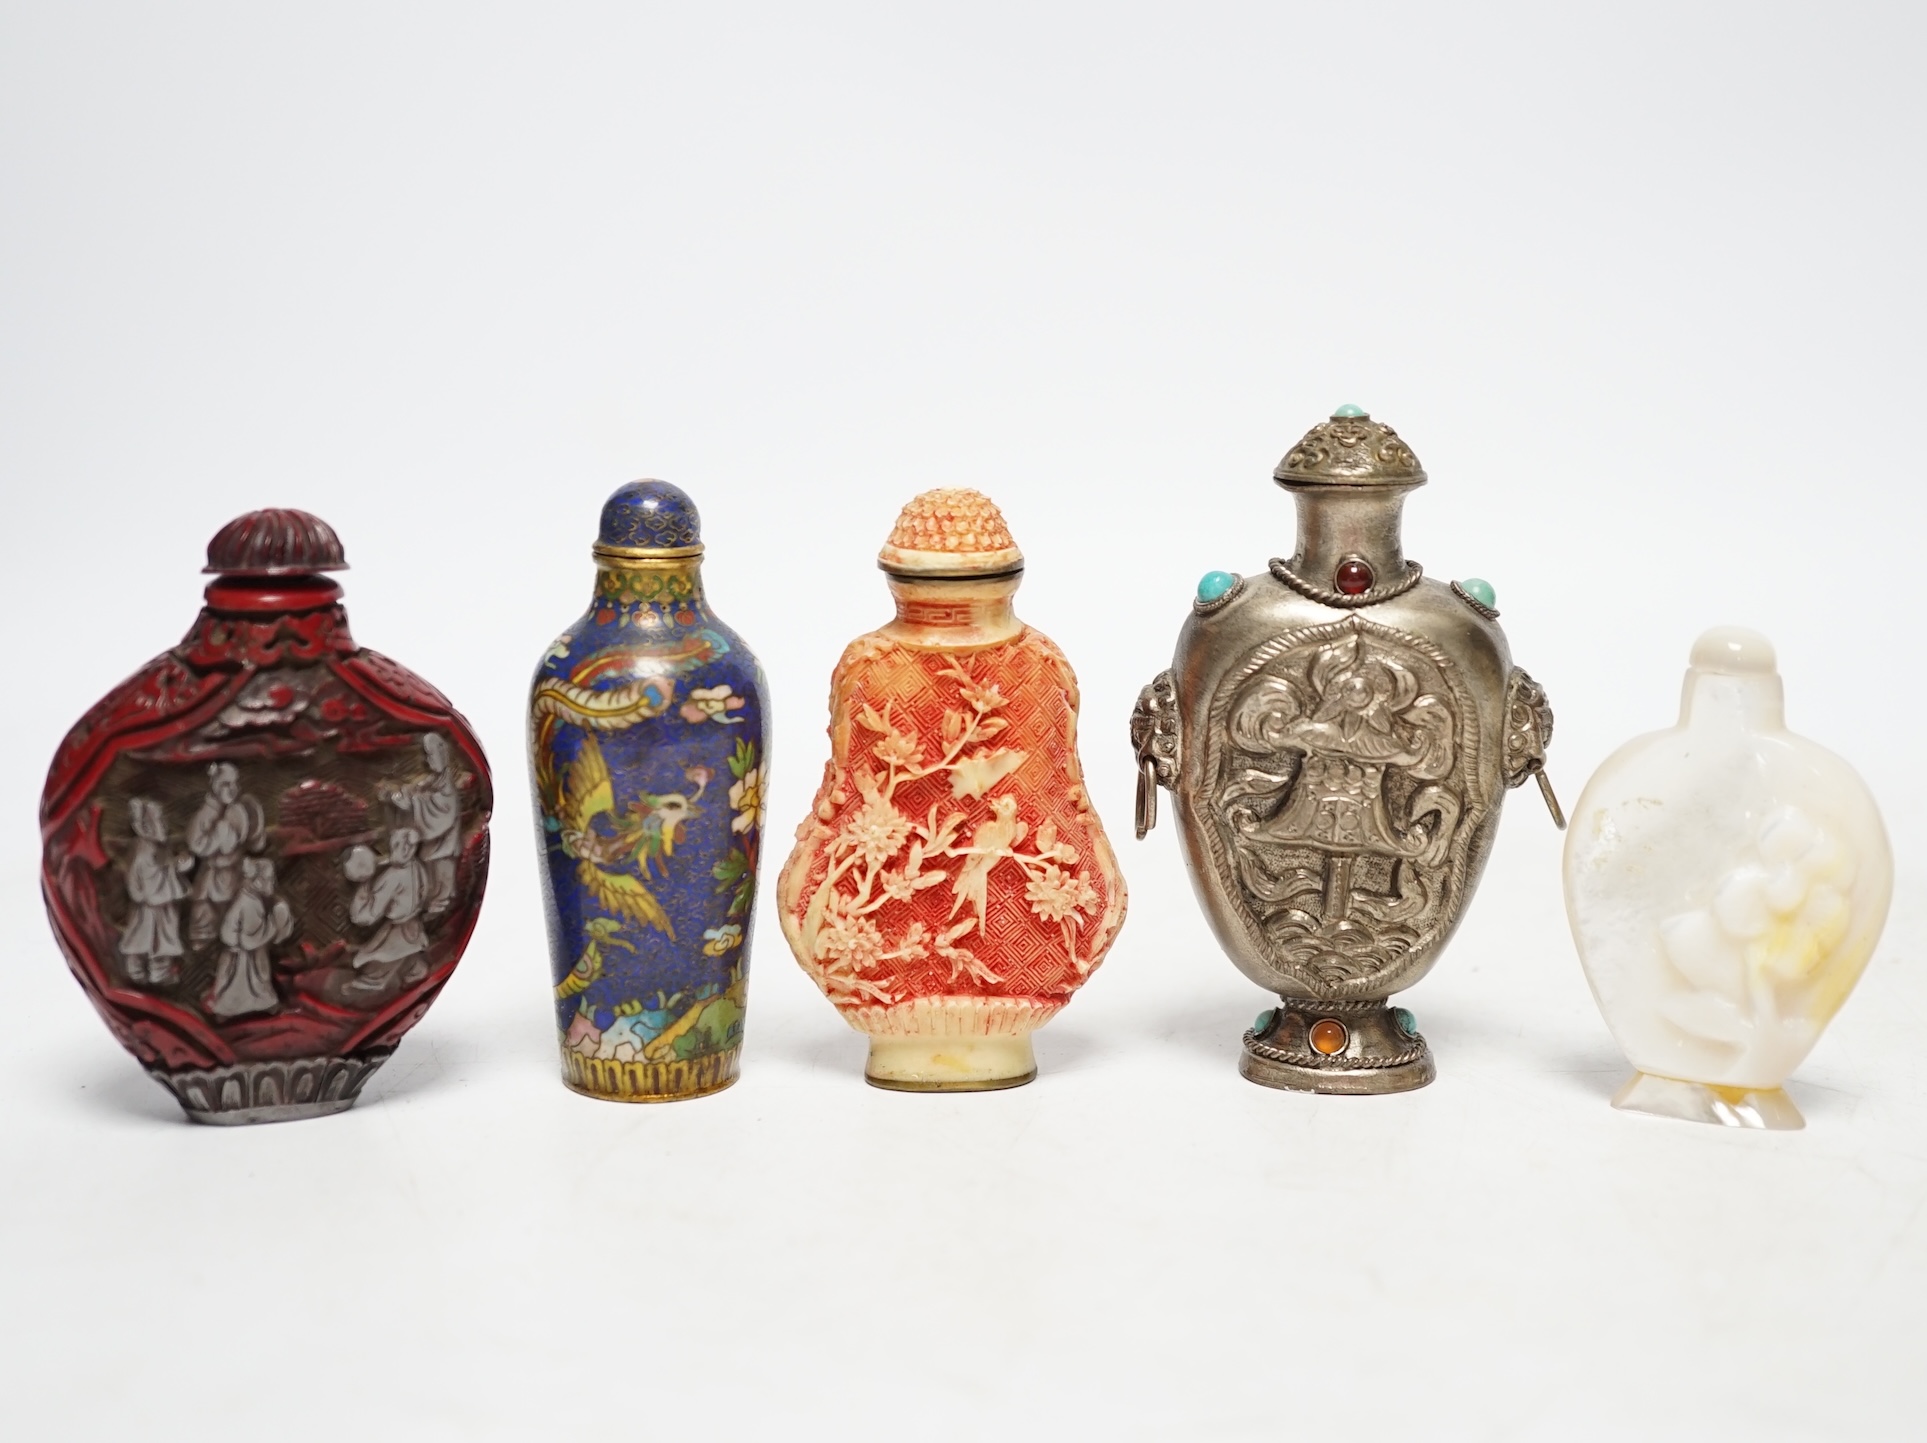 A Chinese cloisonné enamel snuff bottle, two resin snuff bottles, a carved mother of pearl snuff bottle and a Tibetan style metal snuff bottle, largest 8.5cm high